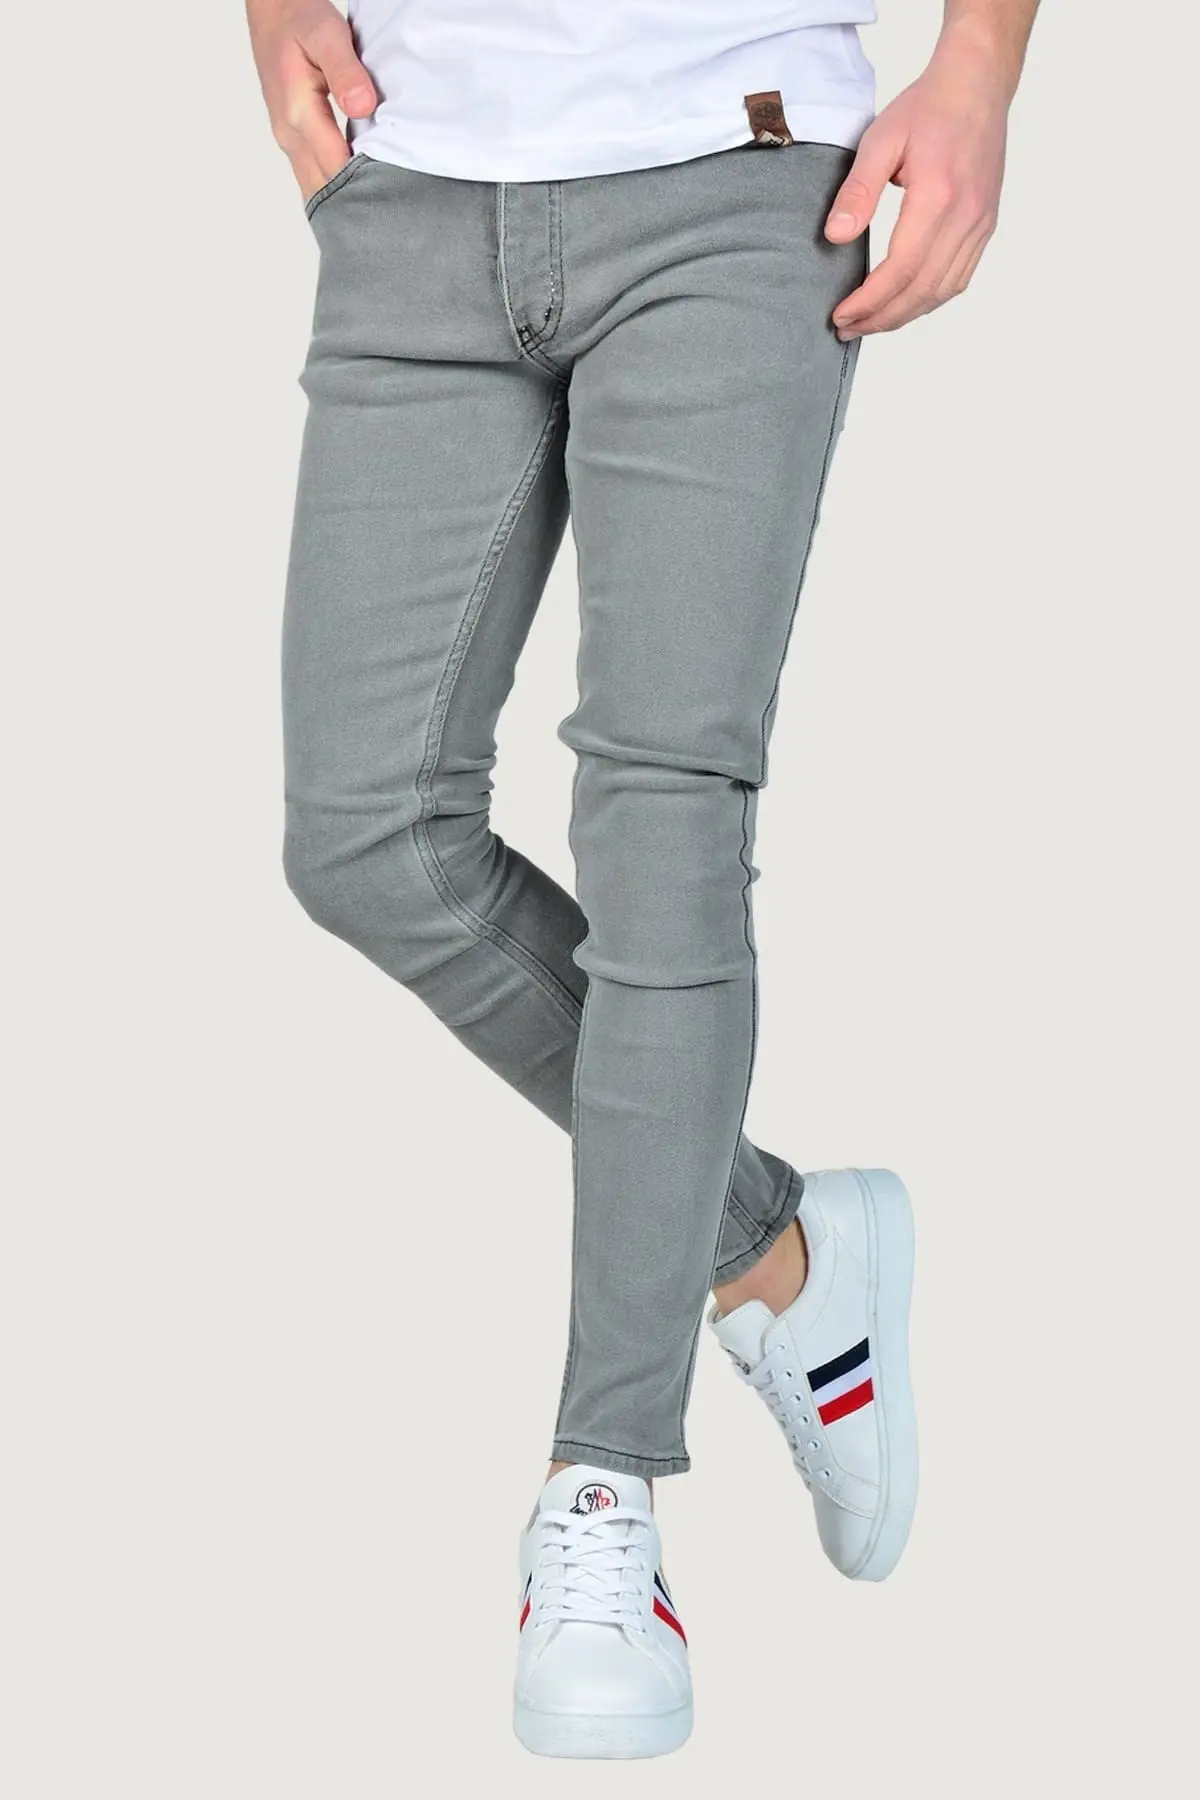 Men's Clothing Denim Pants For Man Trousers Men's Jeans Slim Fit Strech Flexible Fashion Tight-Fitting Stylish Casual